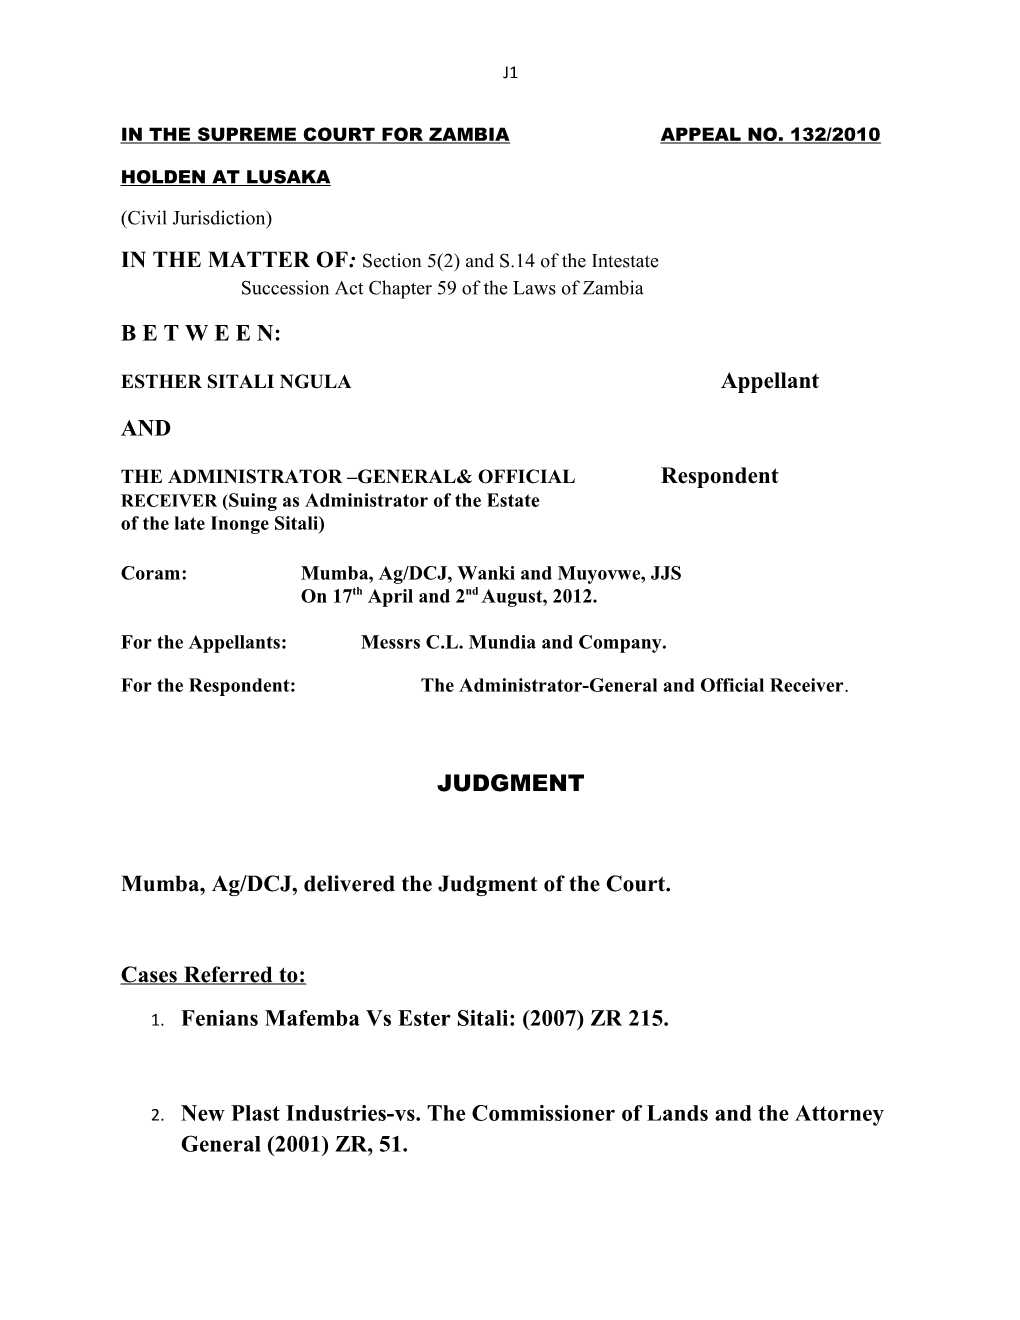 In the Supreme Court for Zambia Appeal No. 132/2010